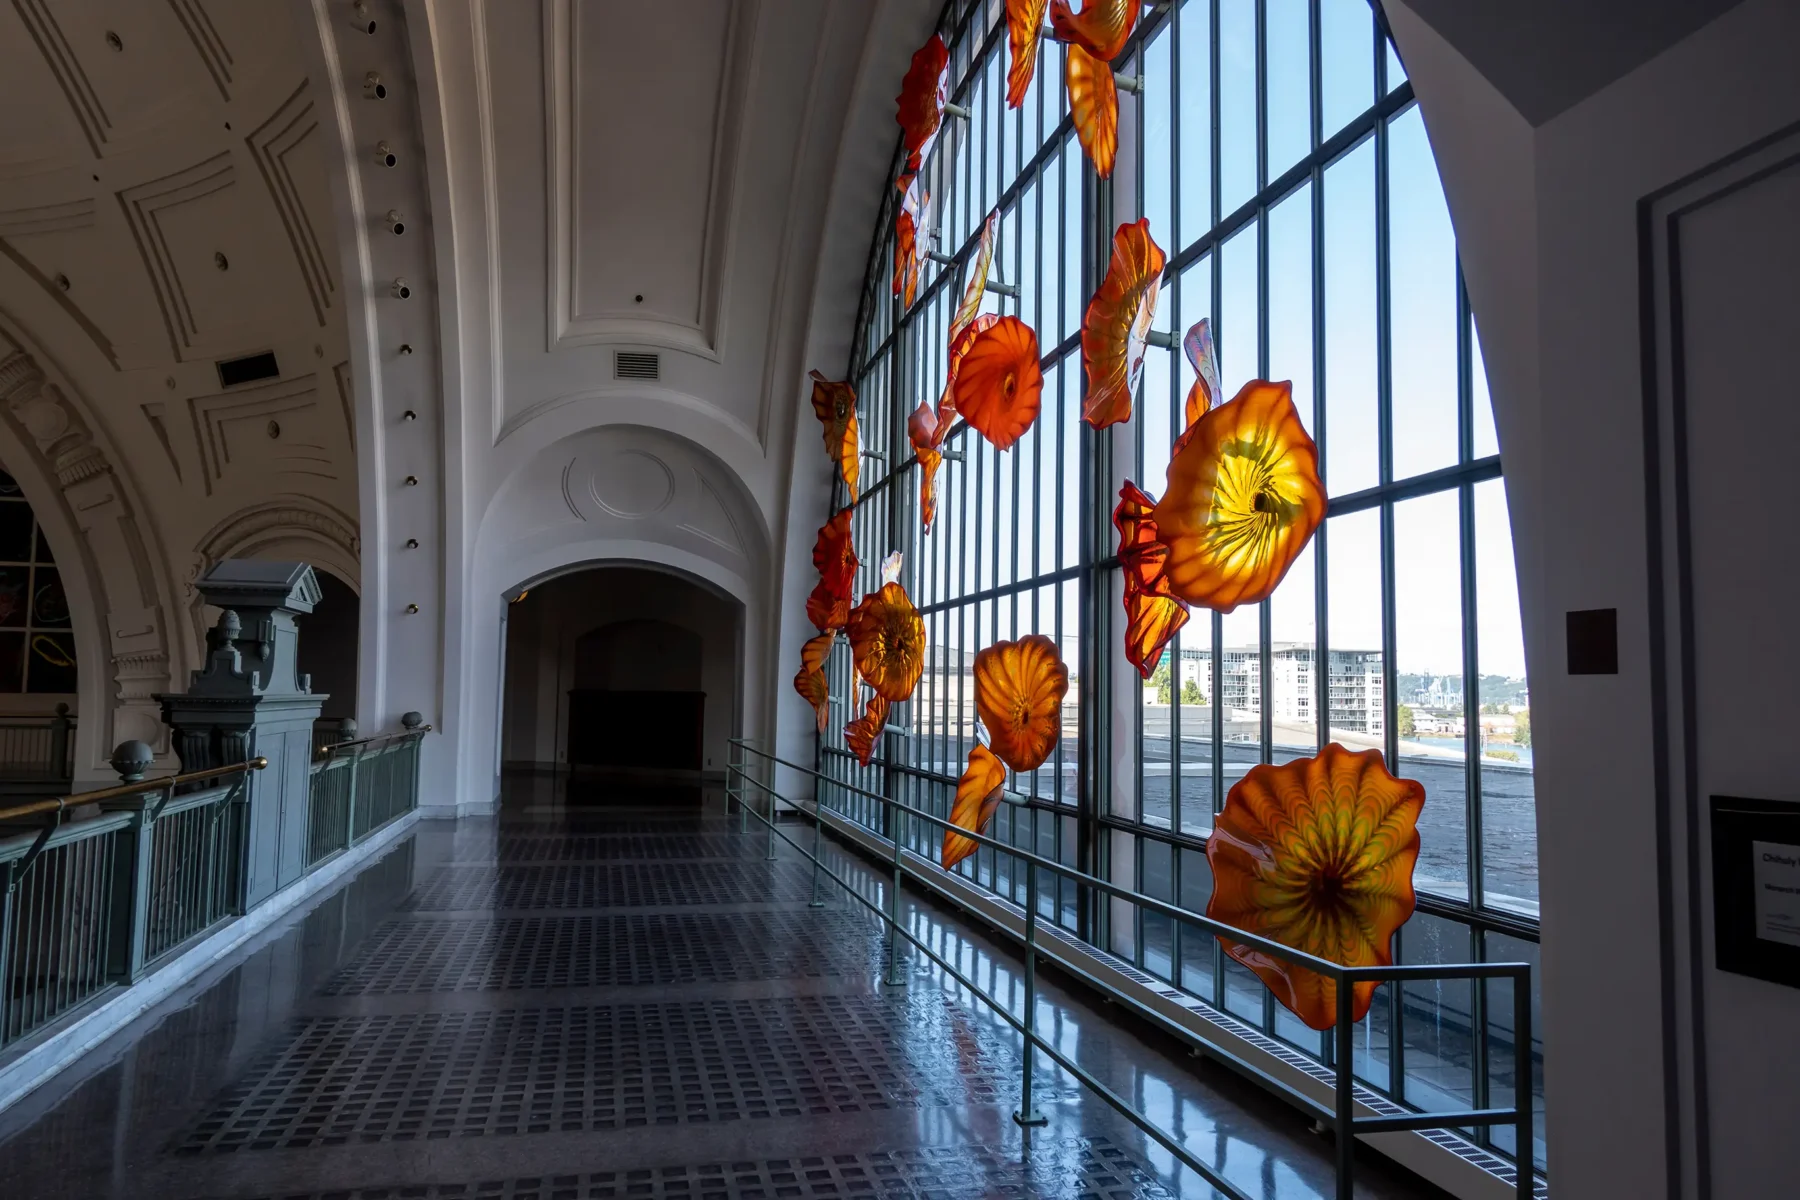 Stained glass art exhibit, large abstract glass flowers hanging in a large window